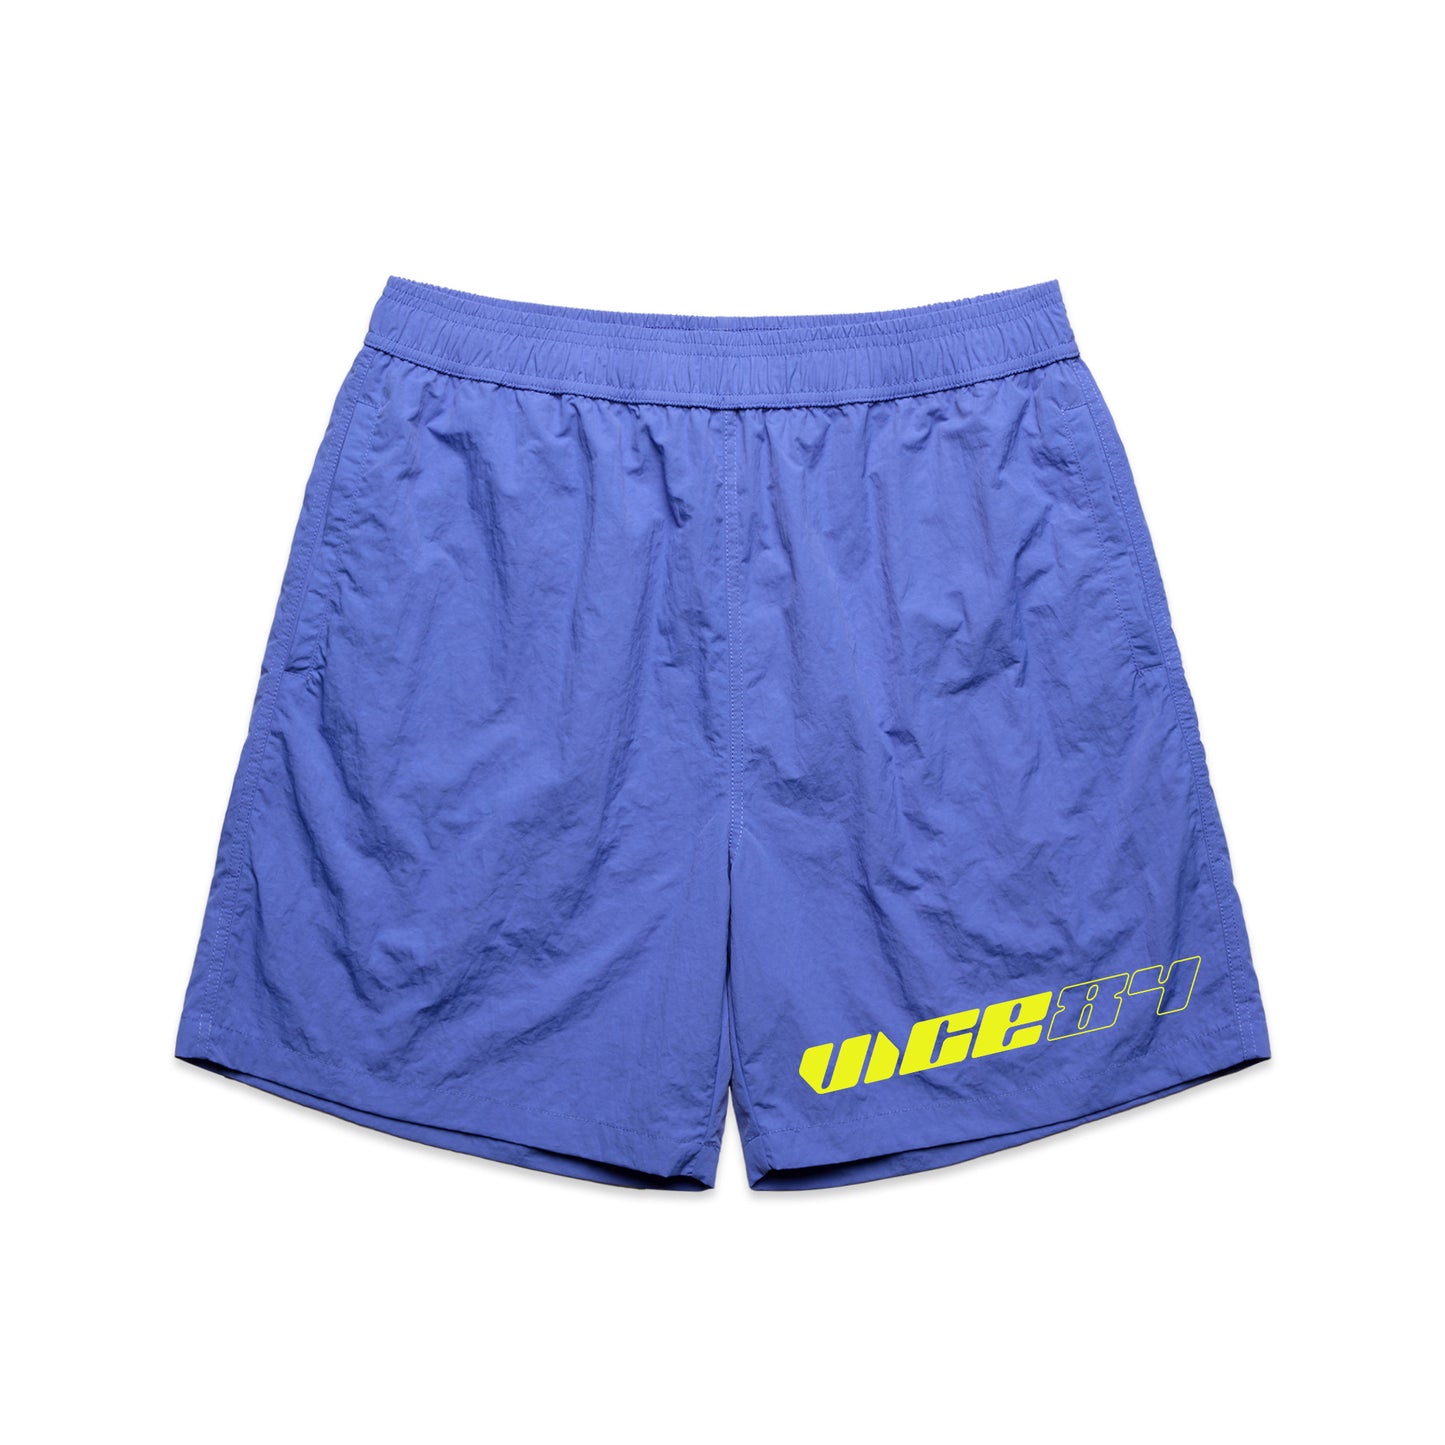 Vice 84 'Racer' Crinkle Recycled Swim Shorts - Pacific Blue